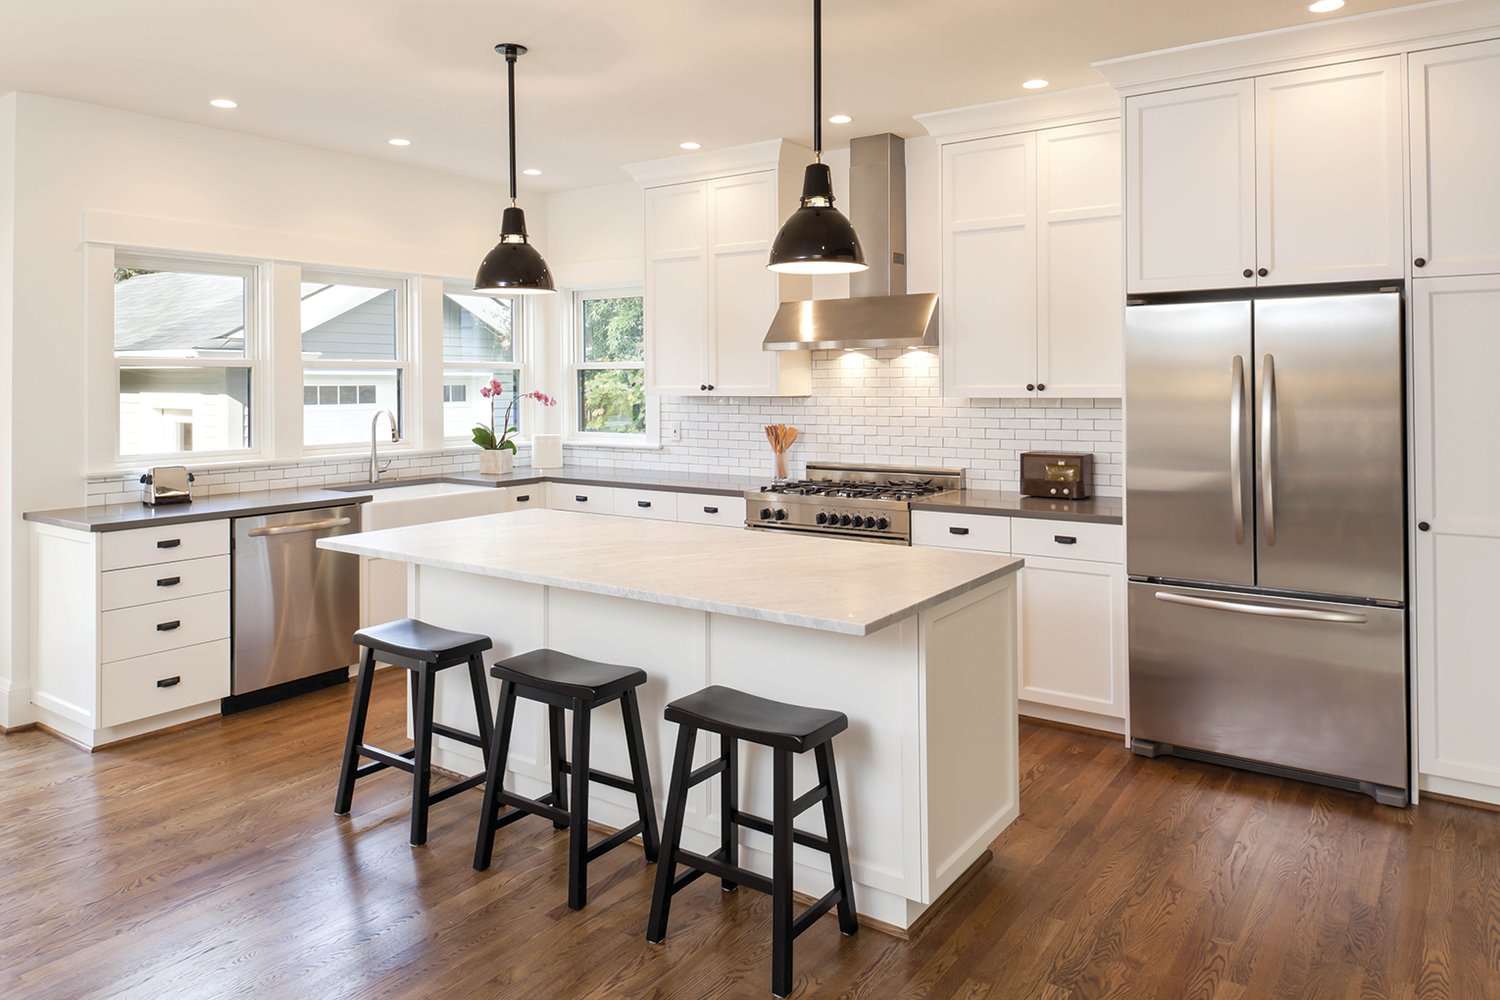 This is a fairly typical kitchen renovation, by modern standards: white cabinets, open space, center island with pendant lights, stainless steel appliances and white subway-tile backsplash.